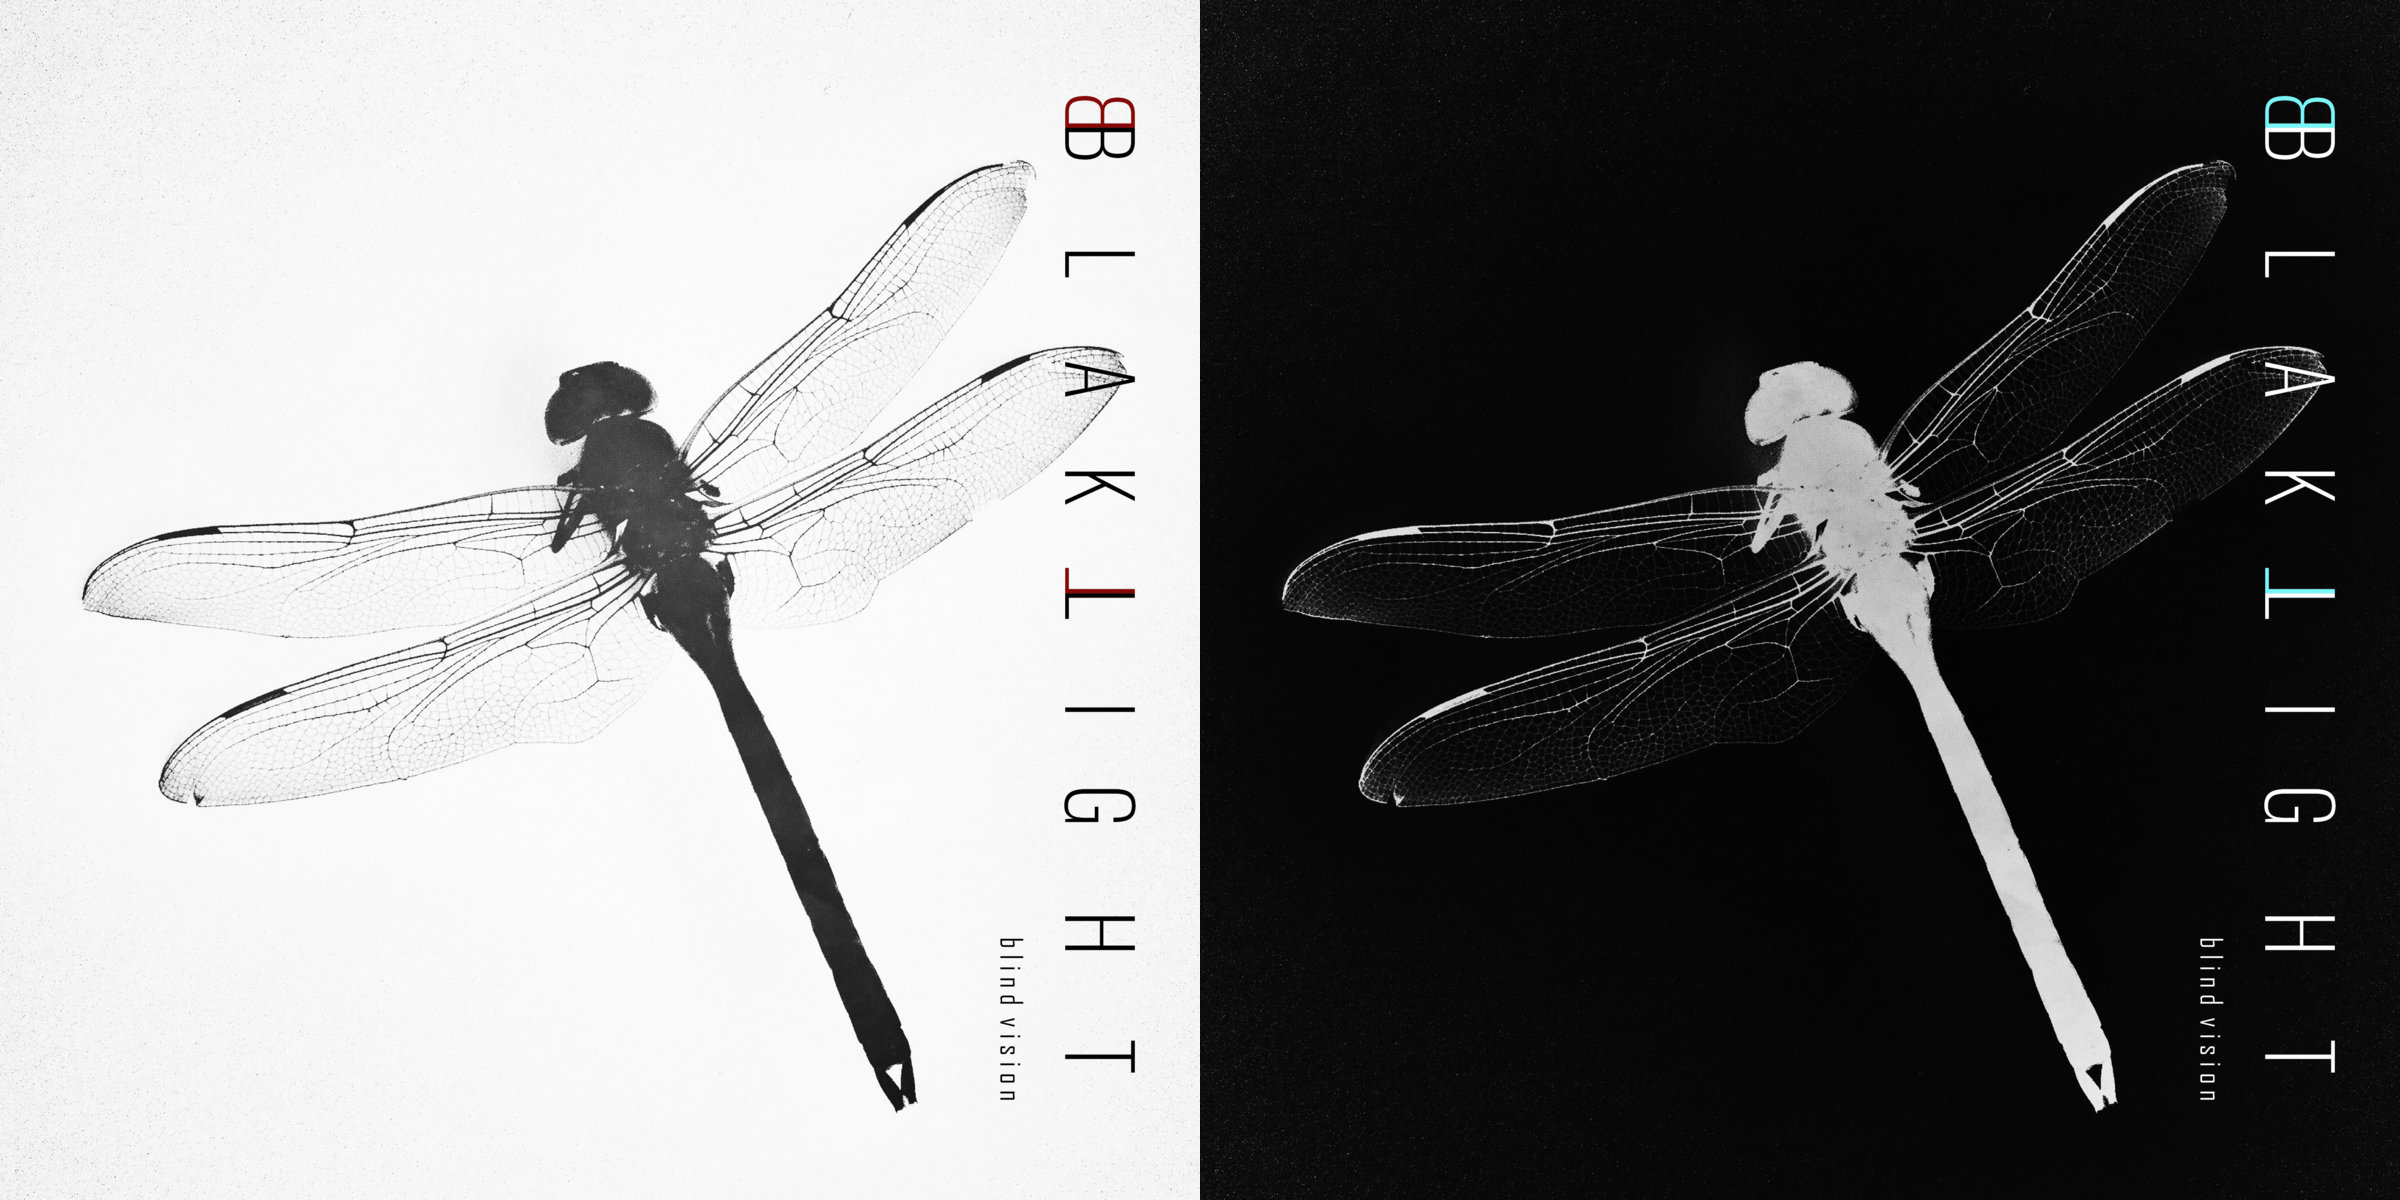 Cover art, featuring a dragonfly, for the three track single by Los Angeles based synth rock trio Blaklight, titled "Blind Vision."